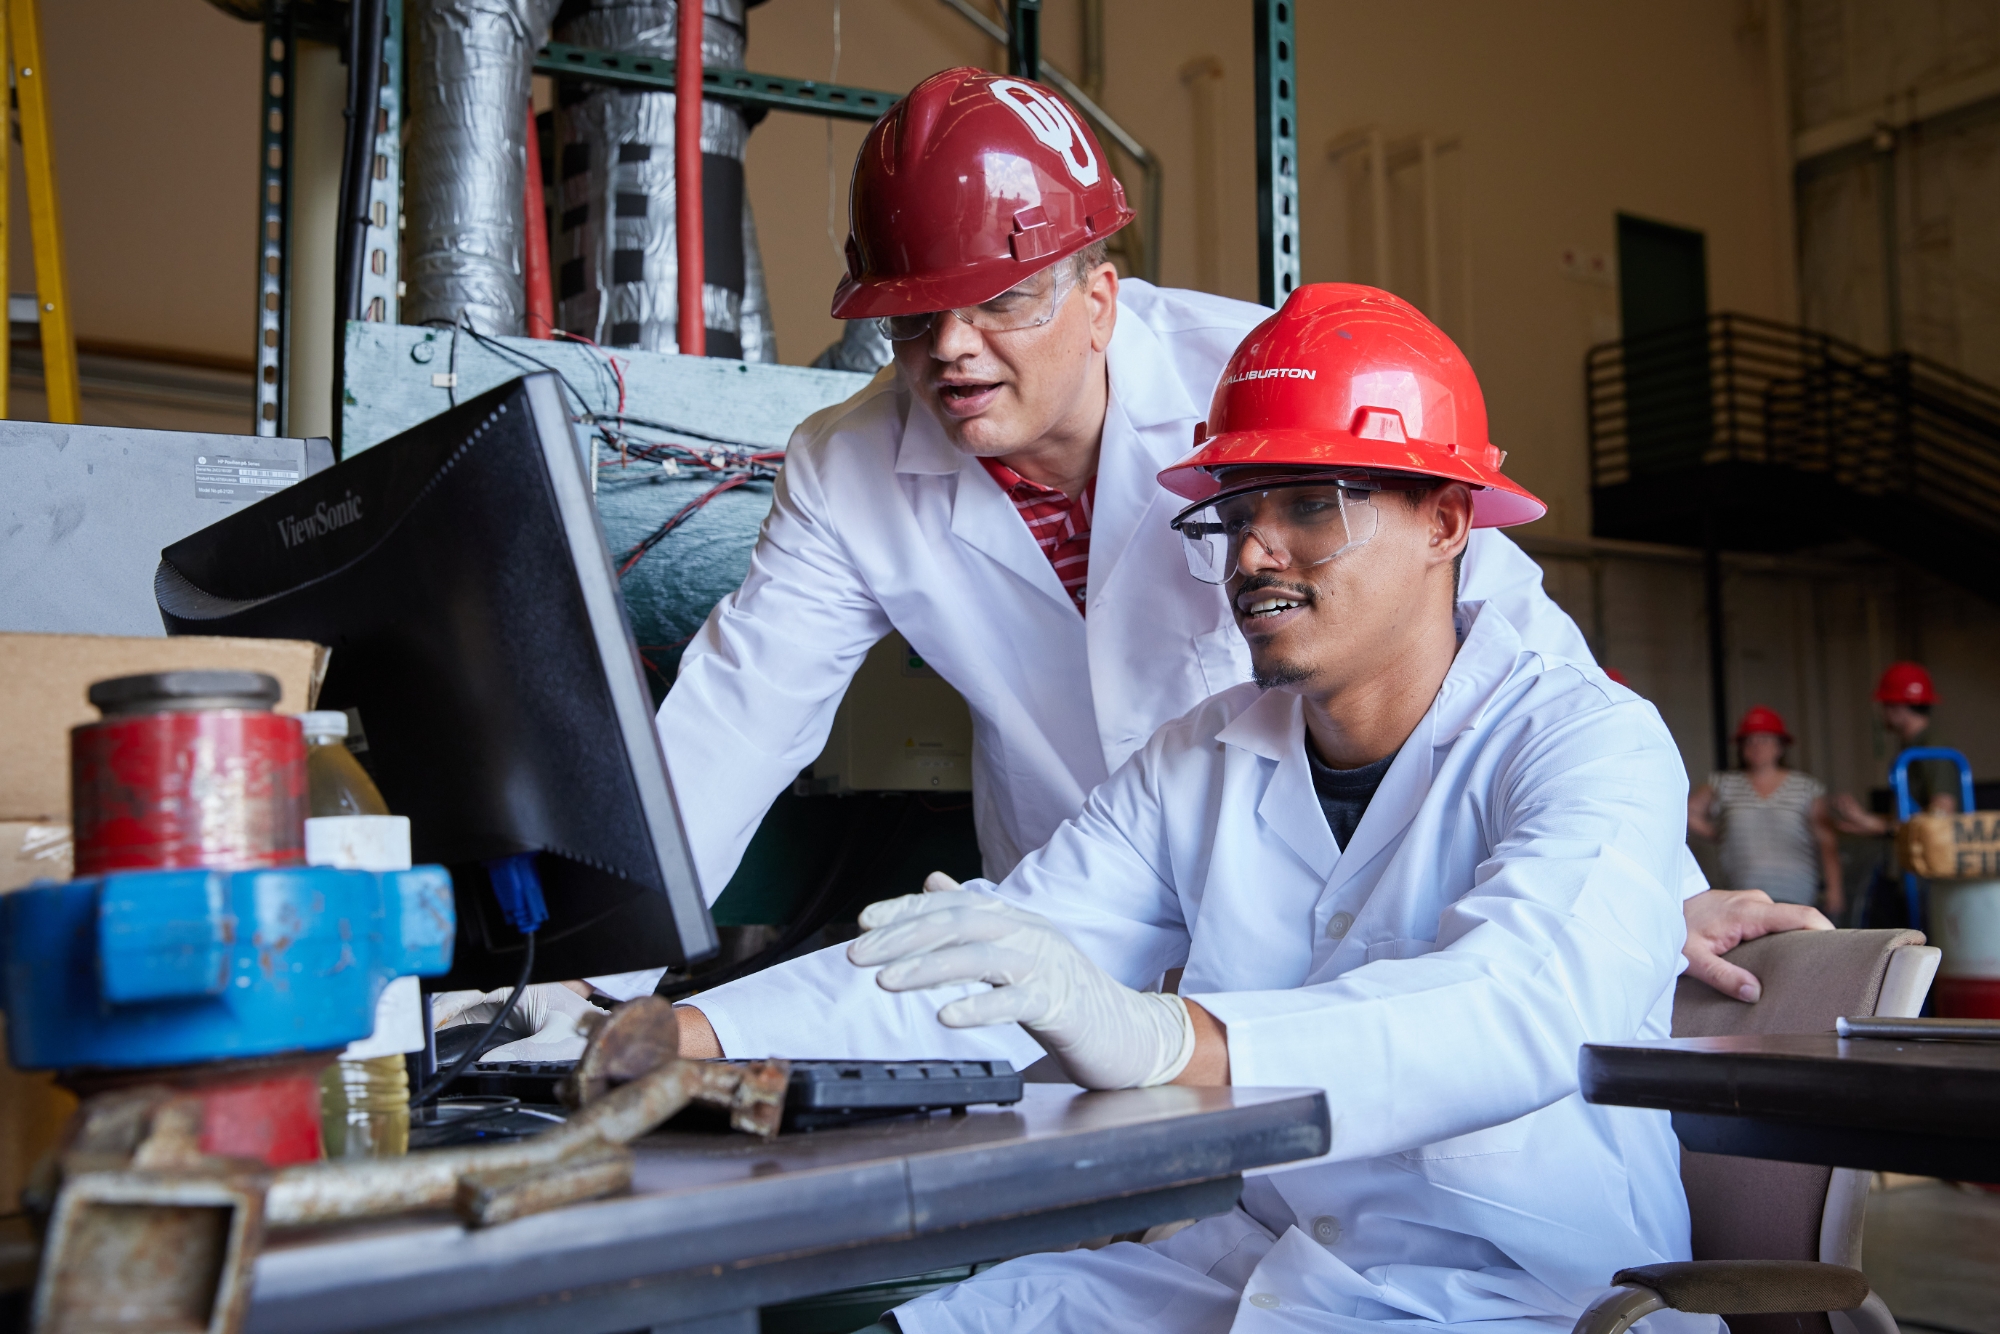 Saeed Salehi (left) and Ph.D. student Majeed Mohmed (right), working on a geothermal project related to fluid flow in geothermal wells and testing of lost circulation materials. Image by Travis Caperton.